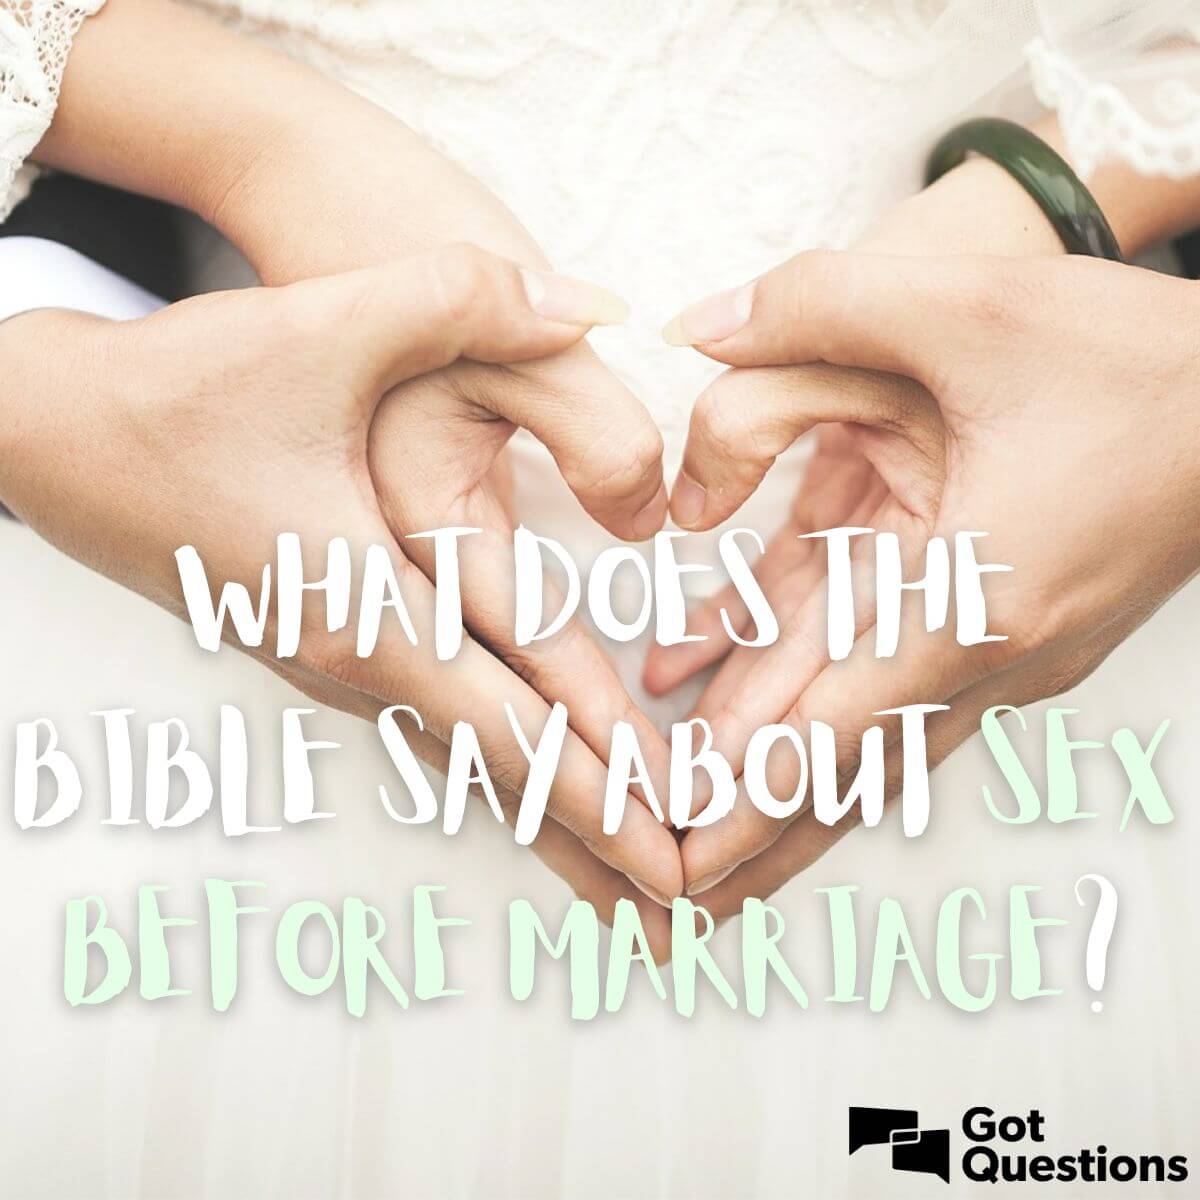 biblical references to married sex